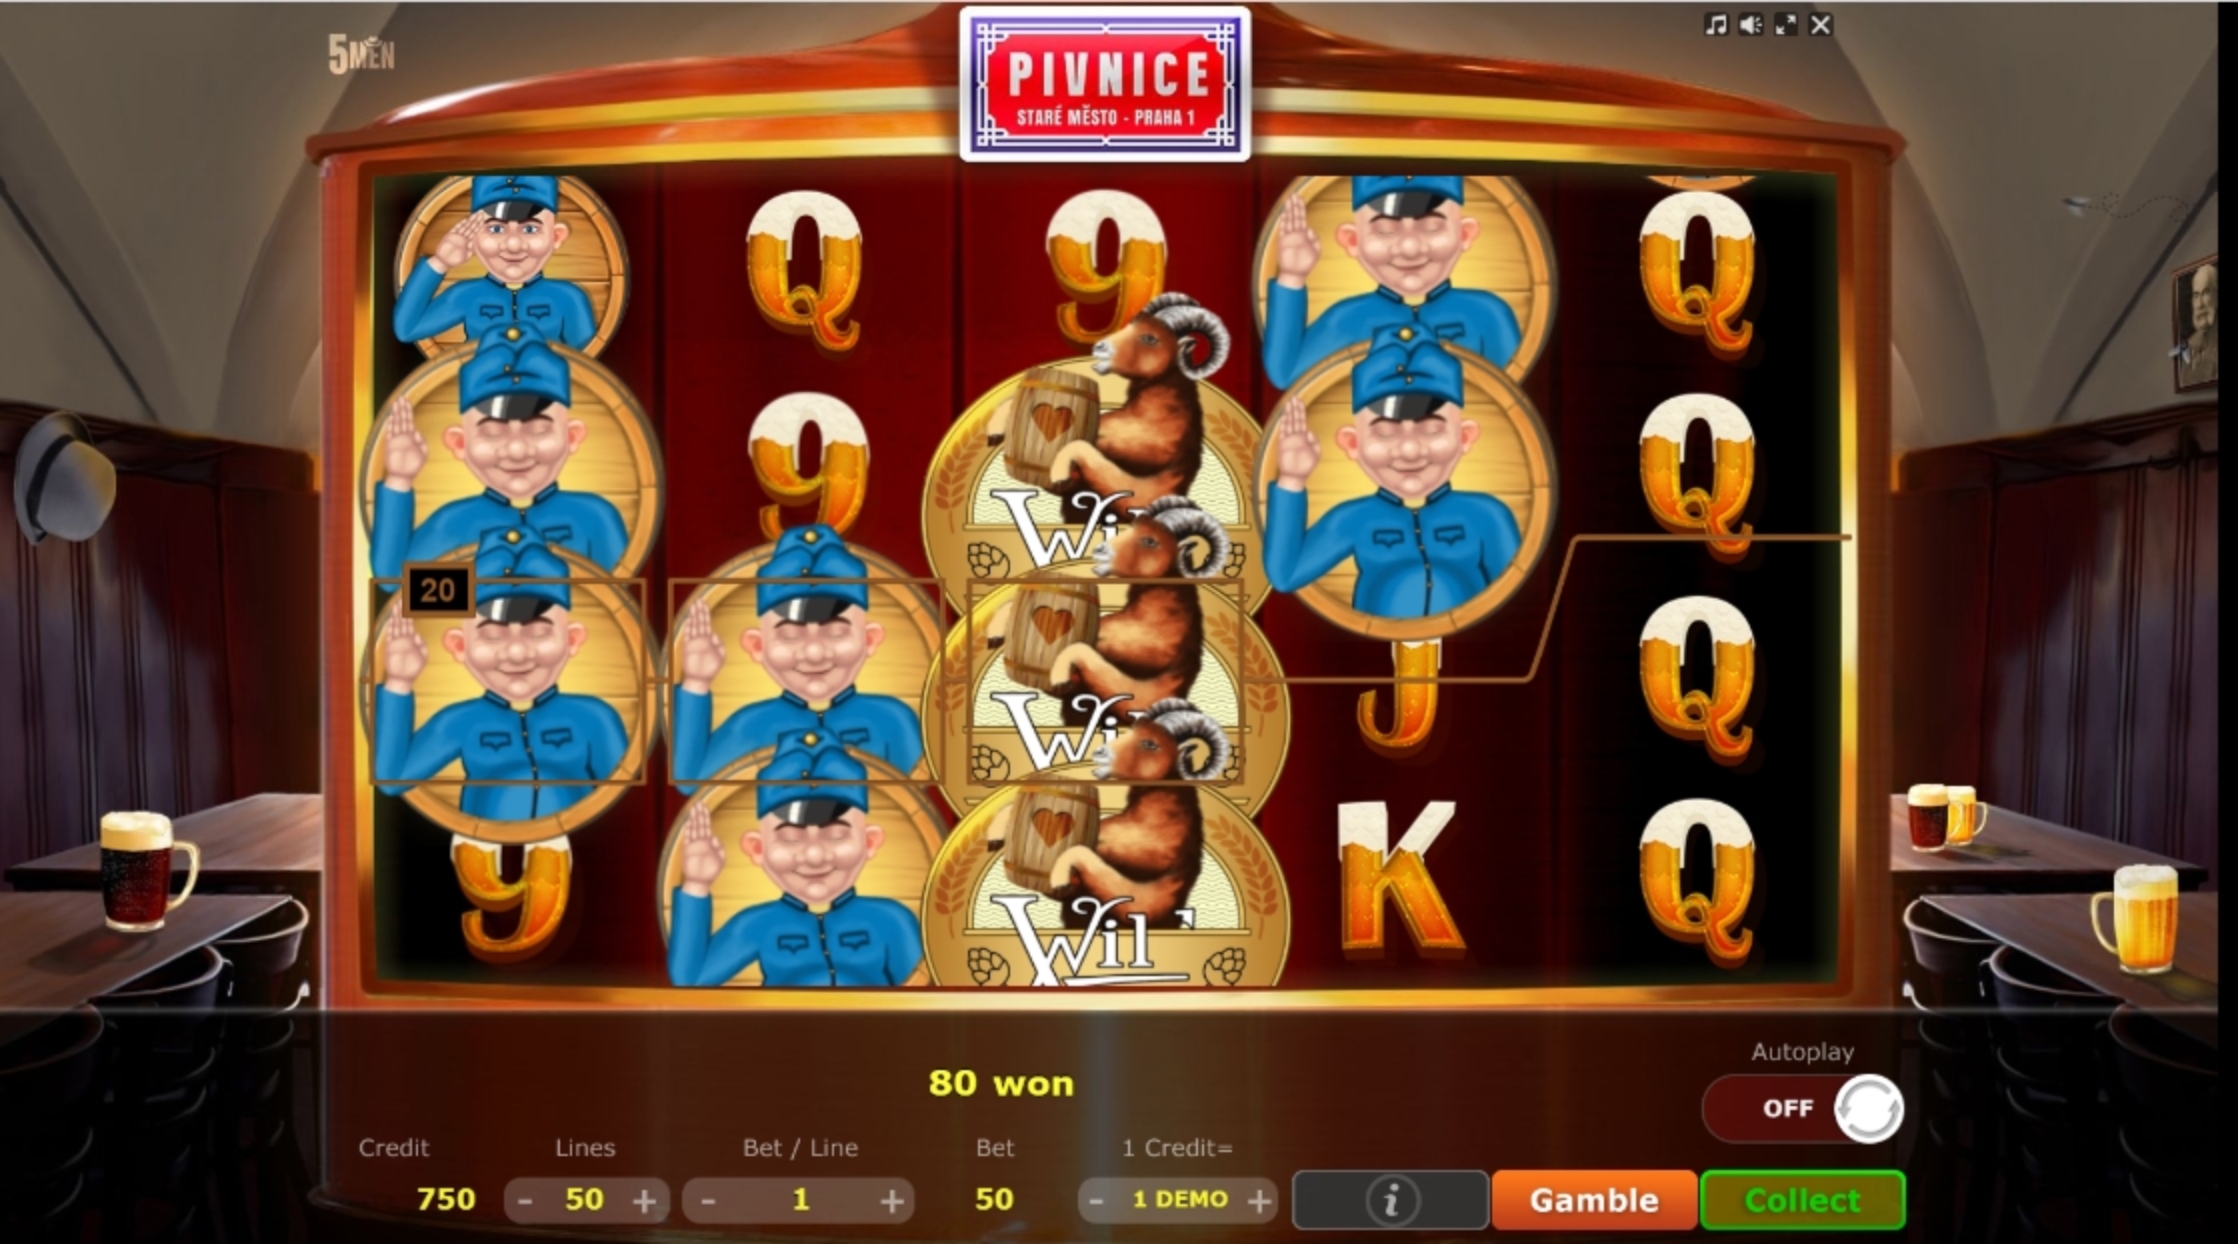 Win Money in Pivnice Free Slot Game by Five Men Games